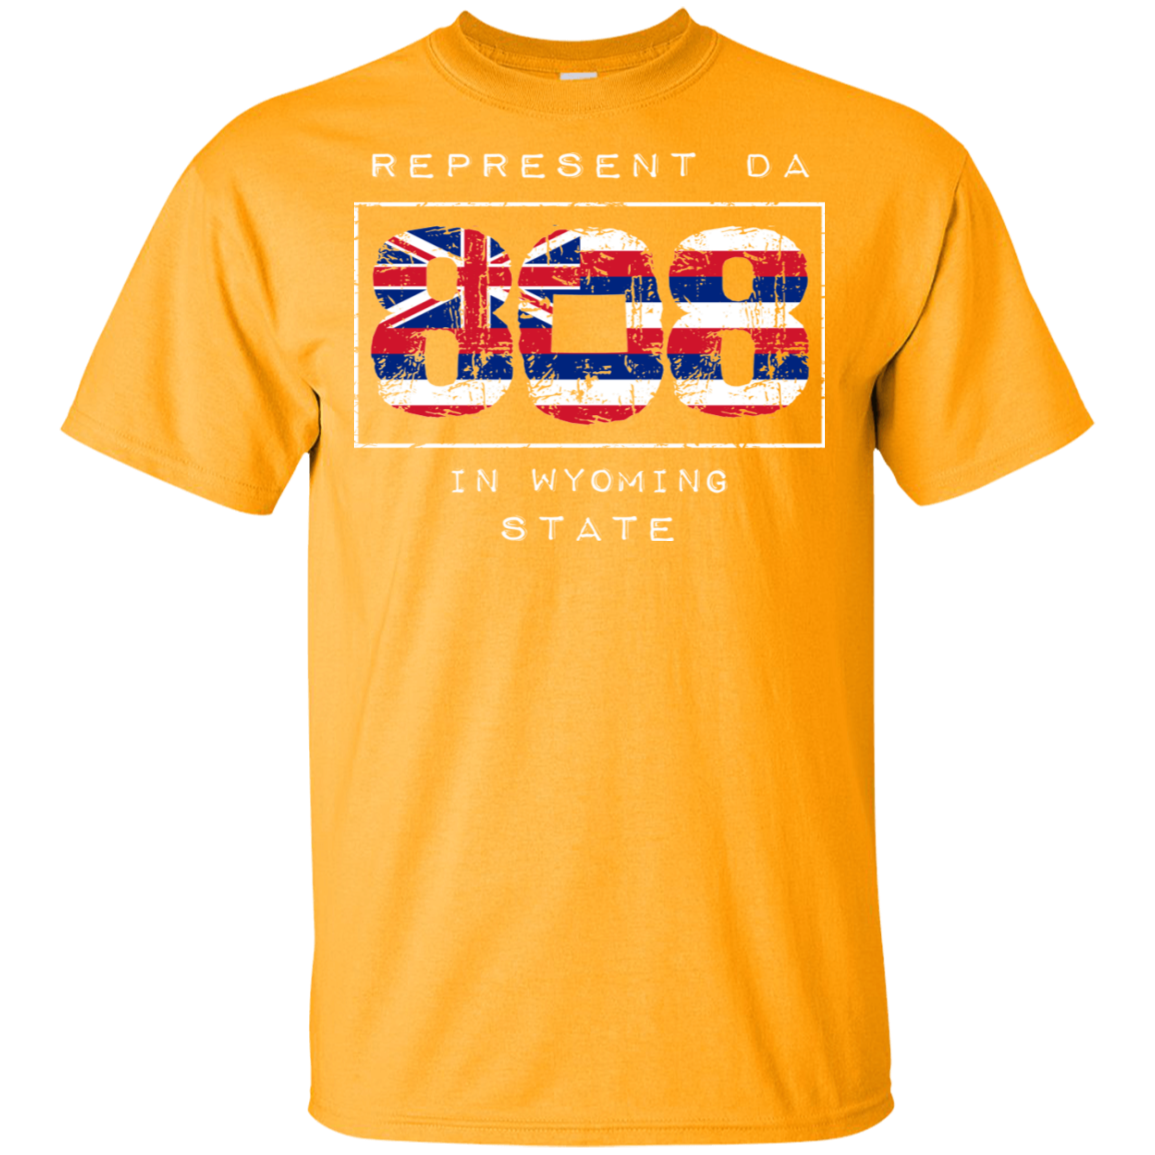 Rep Da 808 In Wyoming State Ultra Cotton T-Shirt, T-Shirts, Hawaii Nei All Day